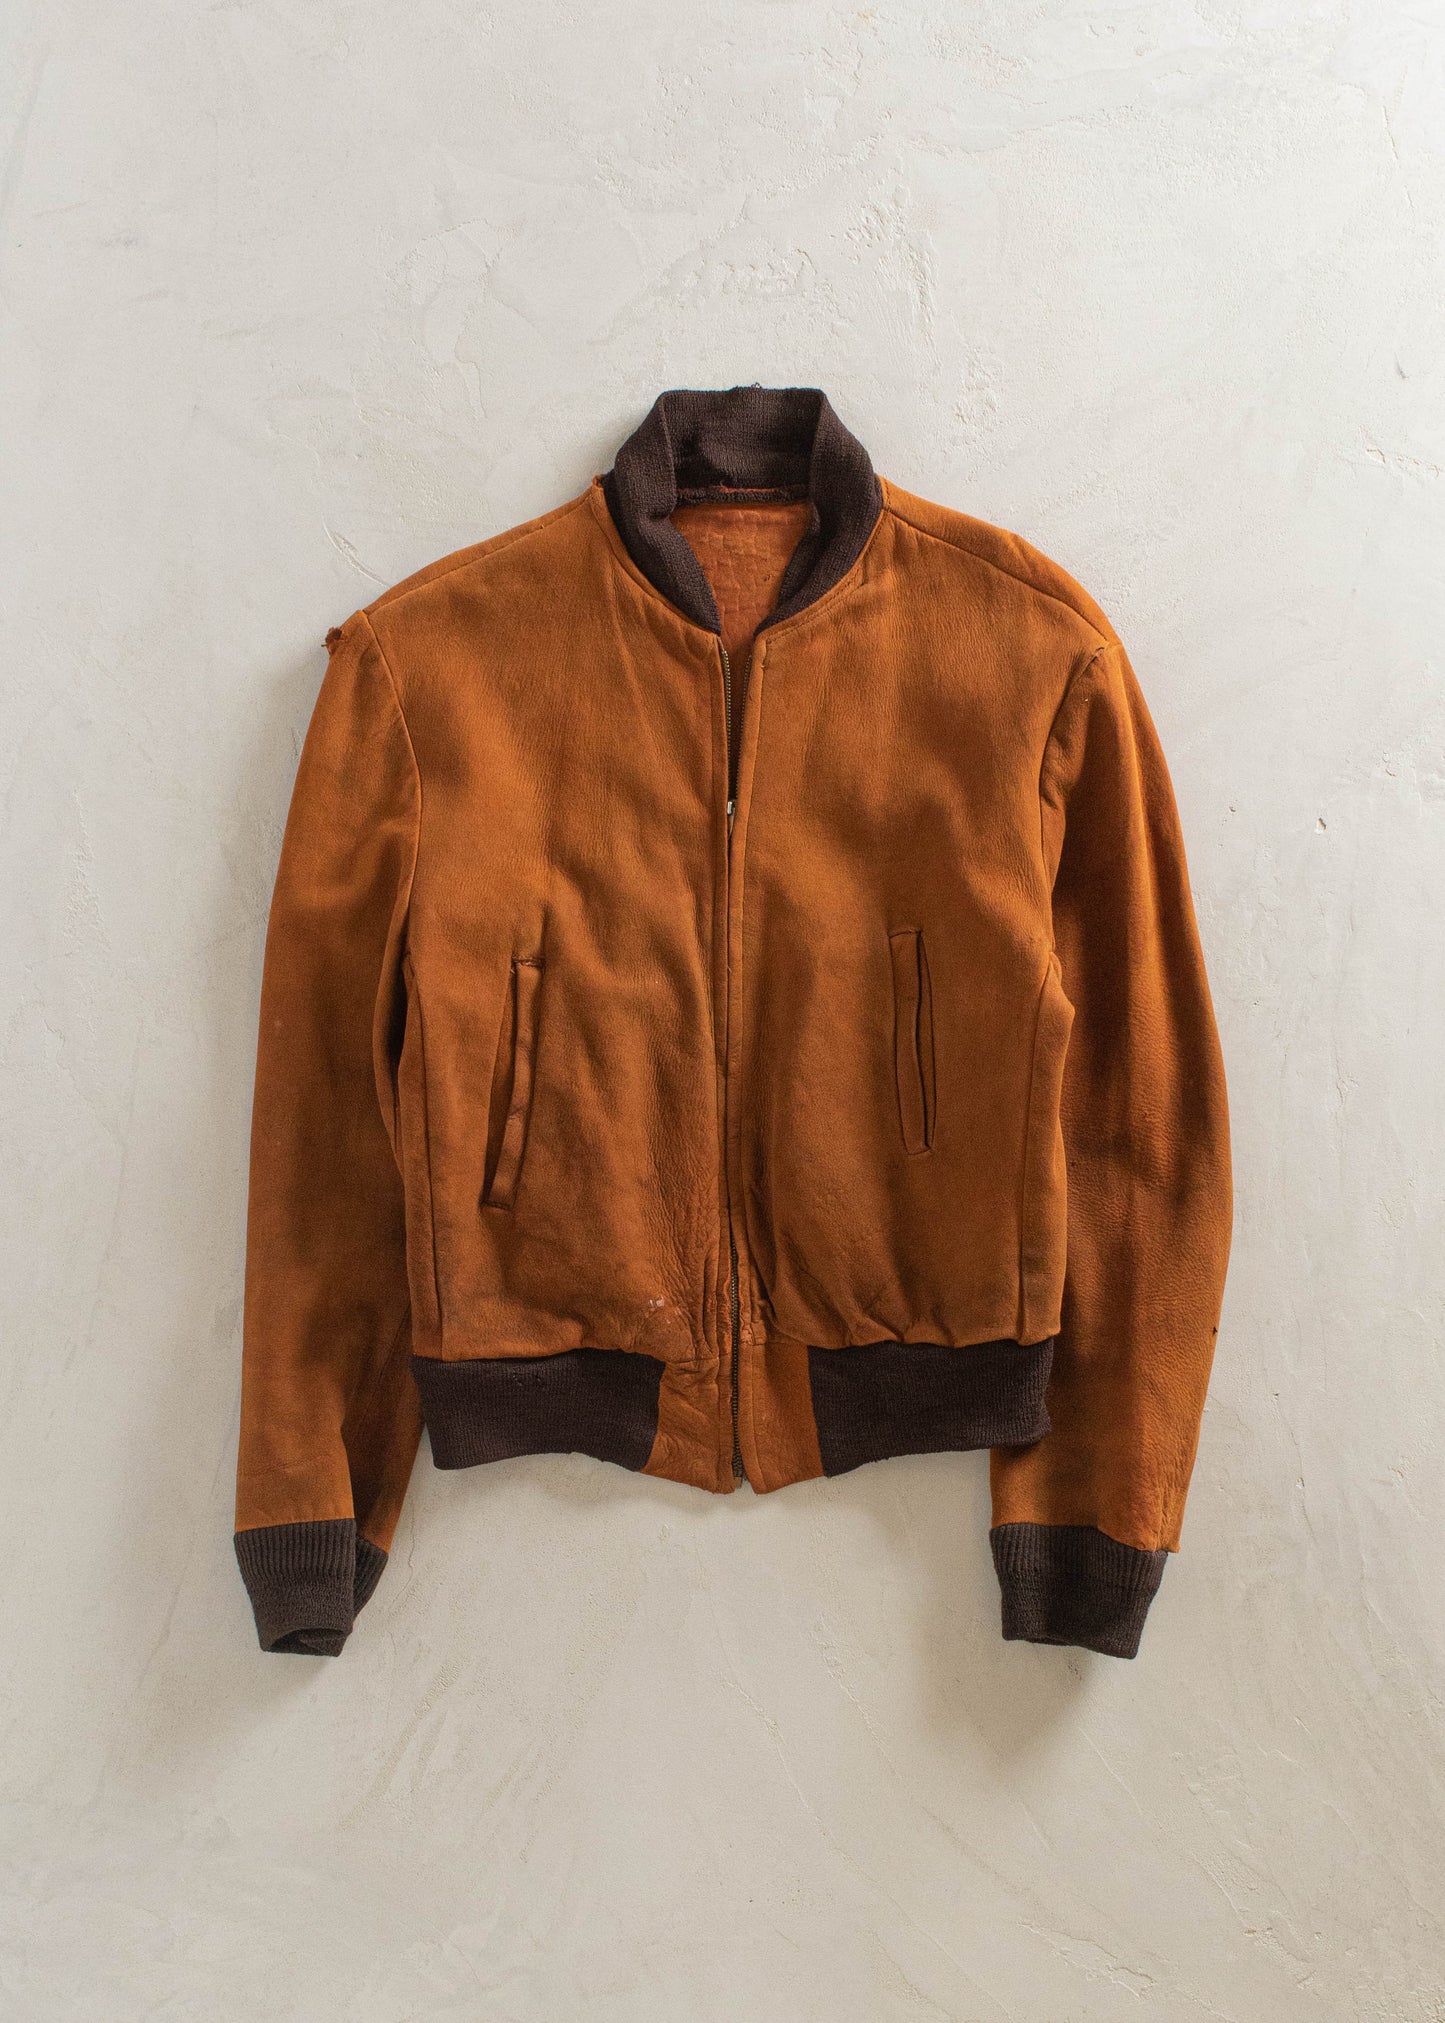 1980s Suede Bomber Jacket Size S/M